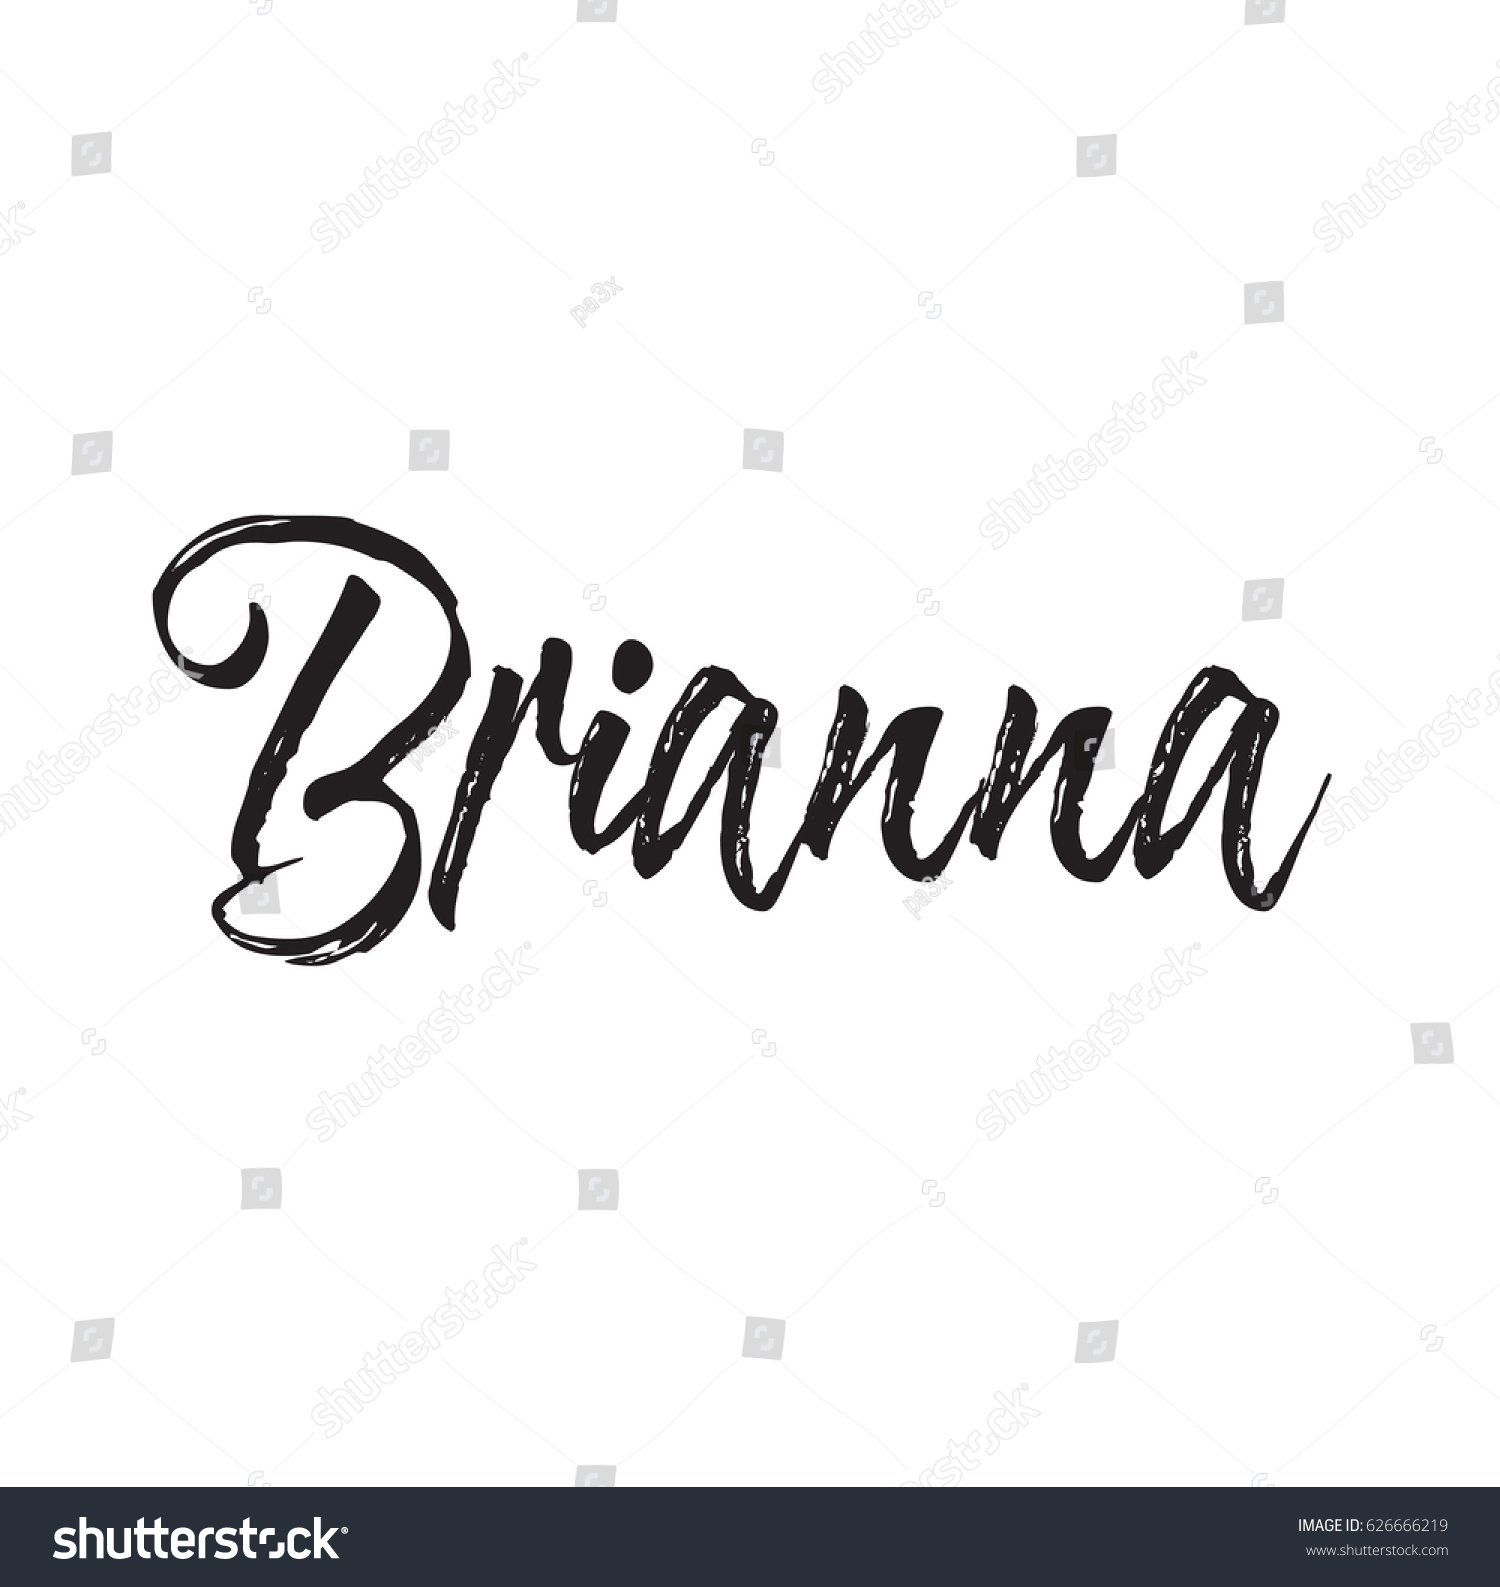 Free download Brianna Text Design Vector Calligraphy Typography Stock ...